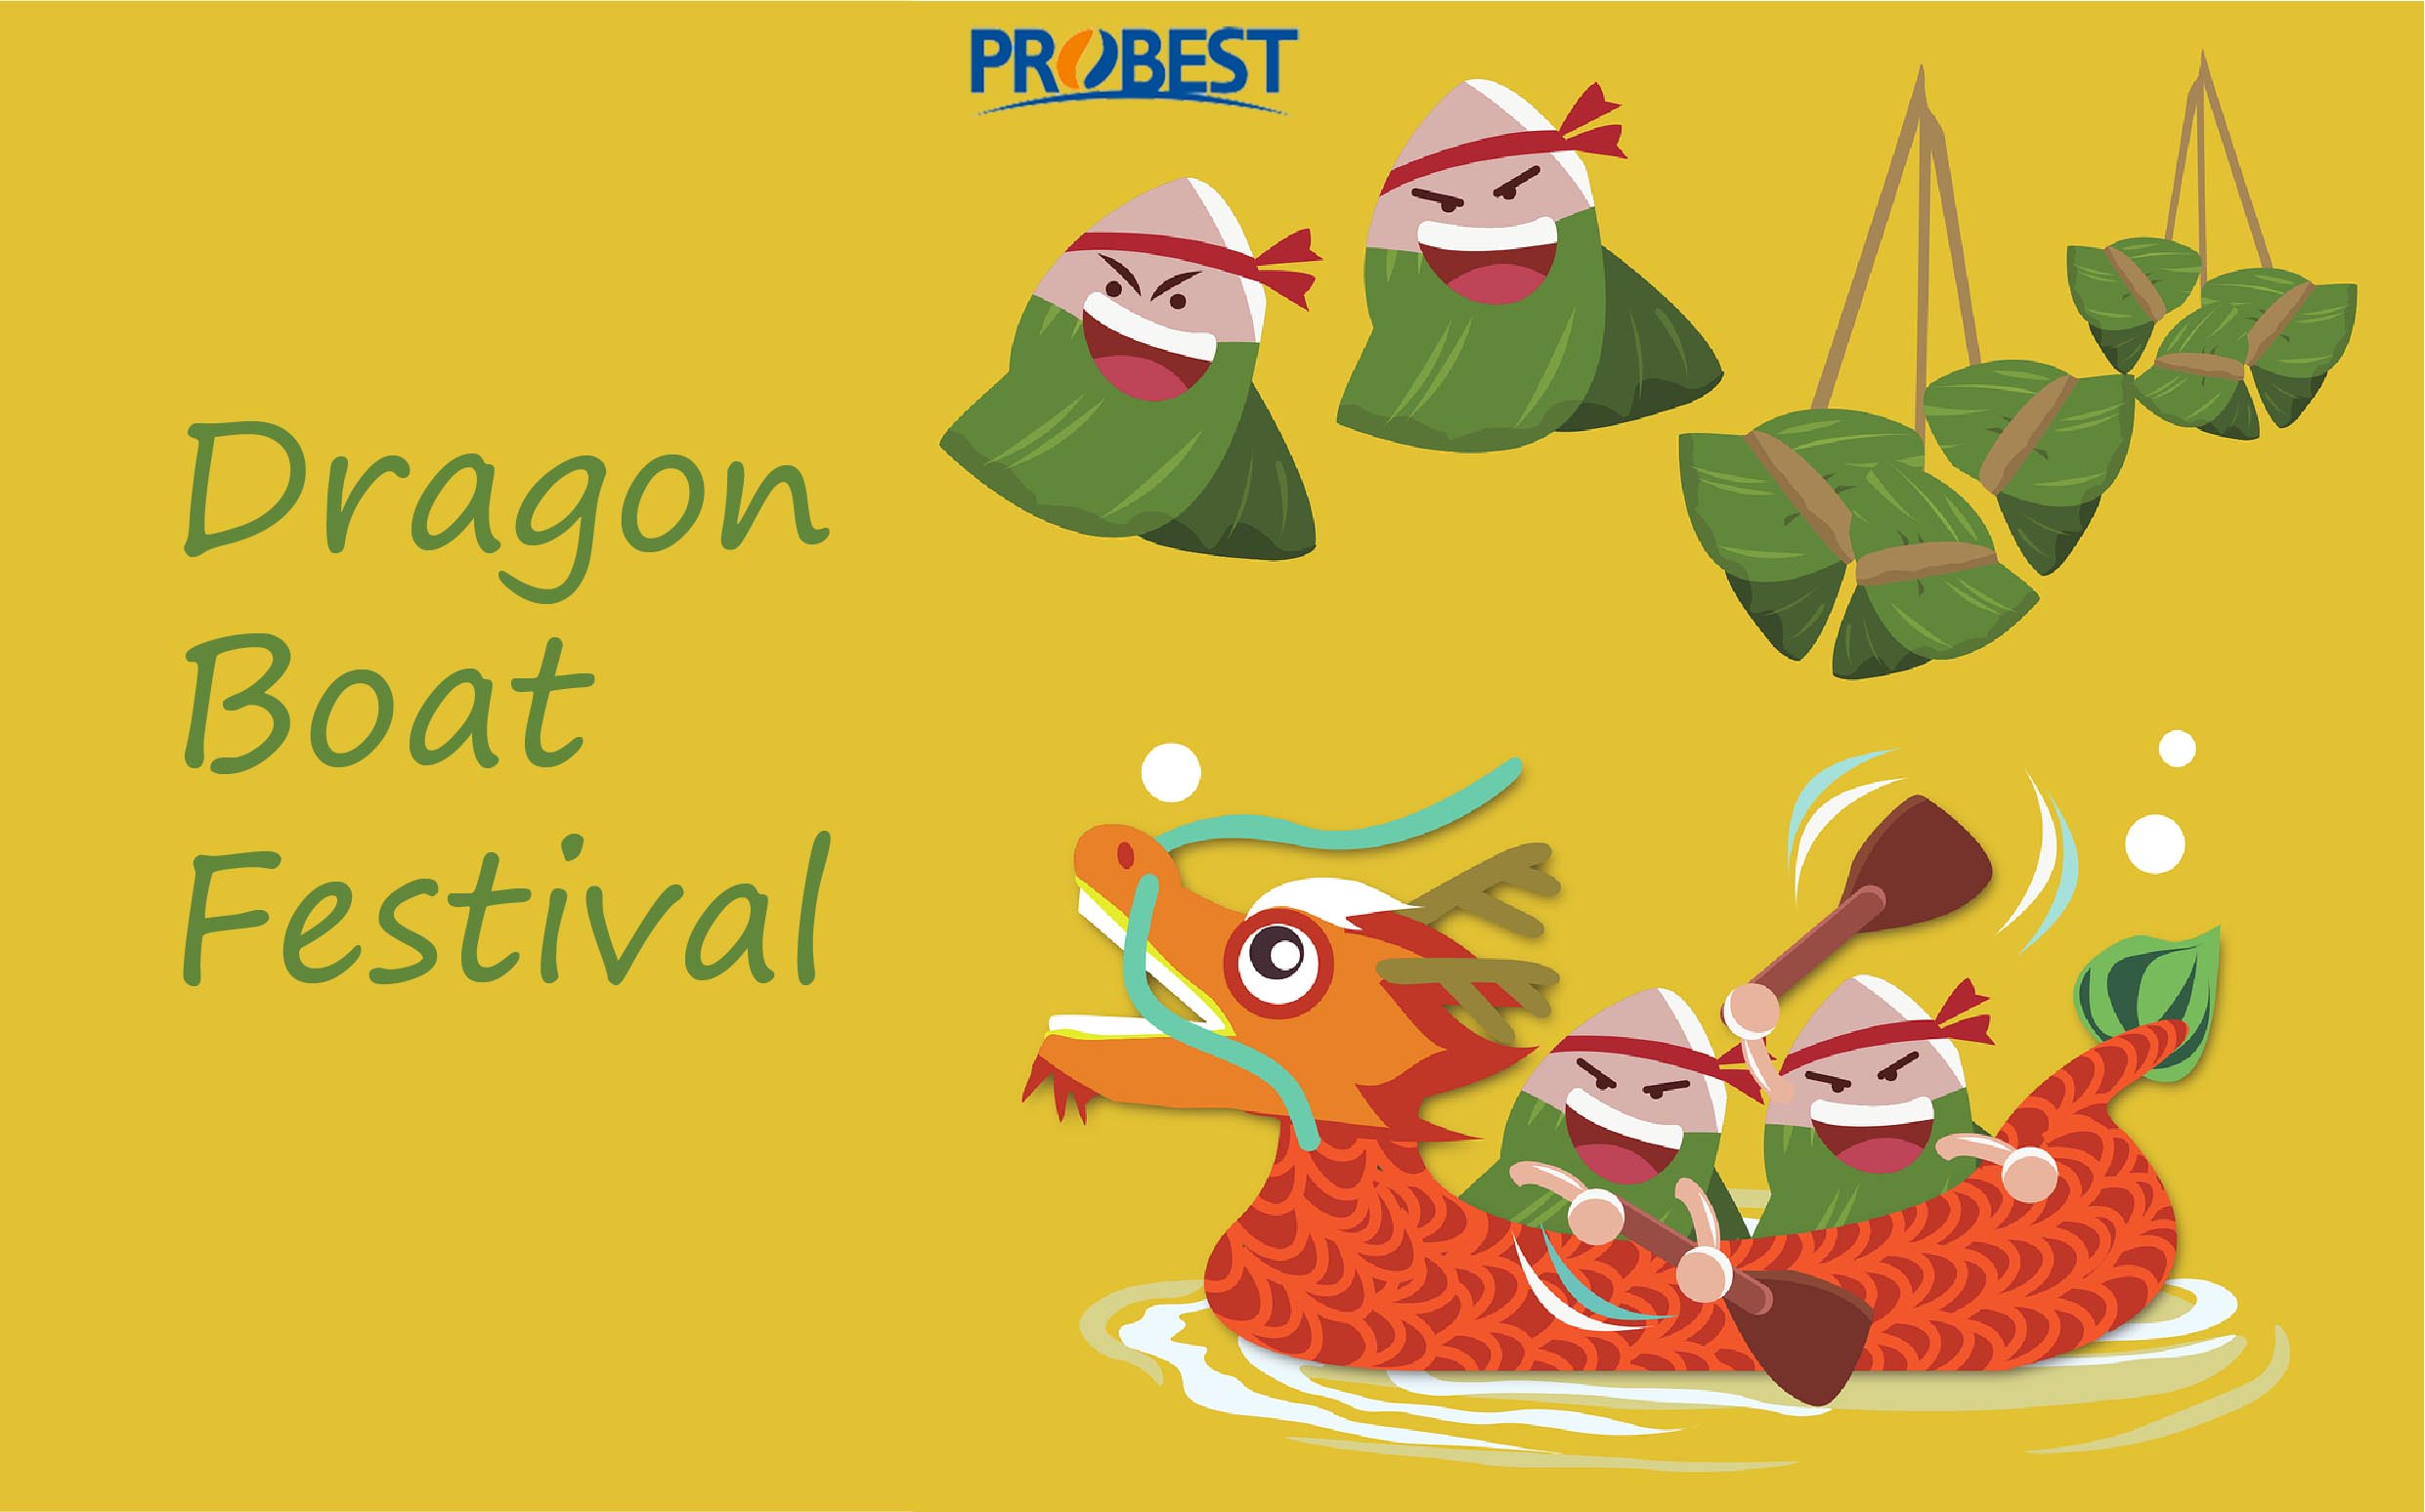 Blessings From PROBEST, Blessings on The Dragon Boat Festival